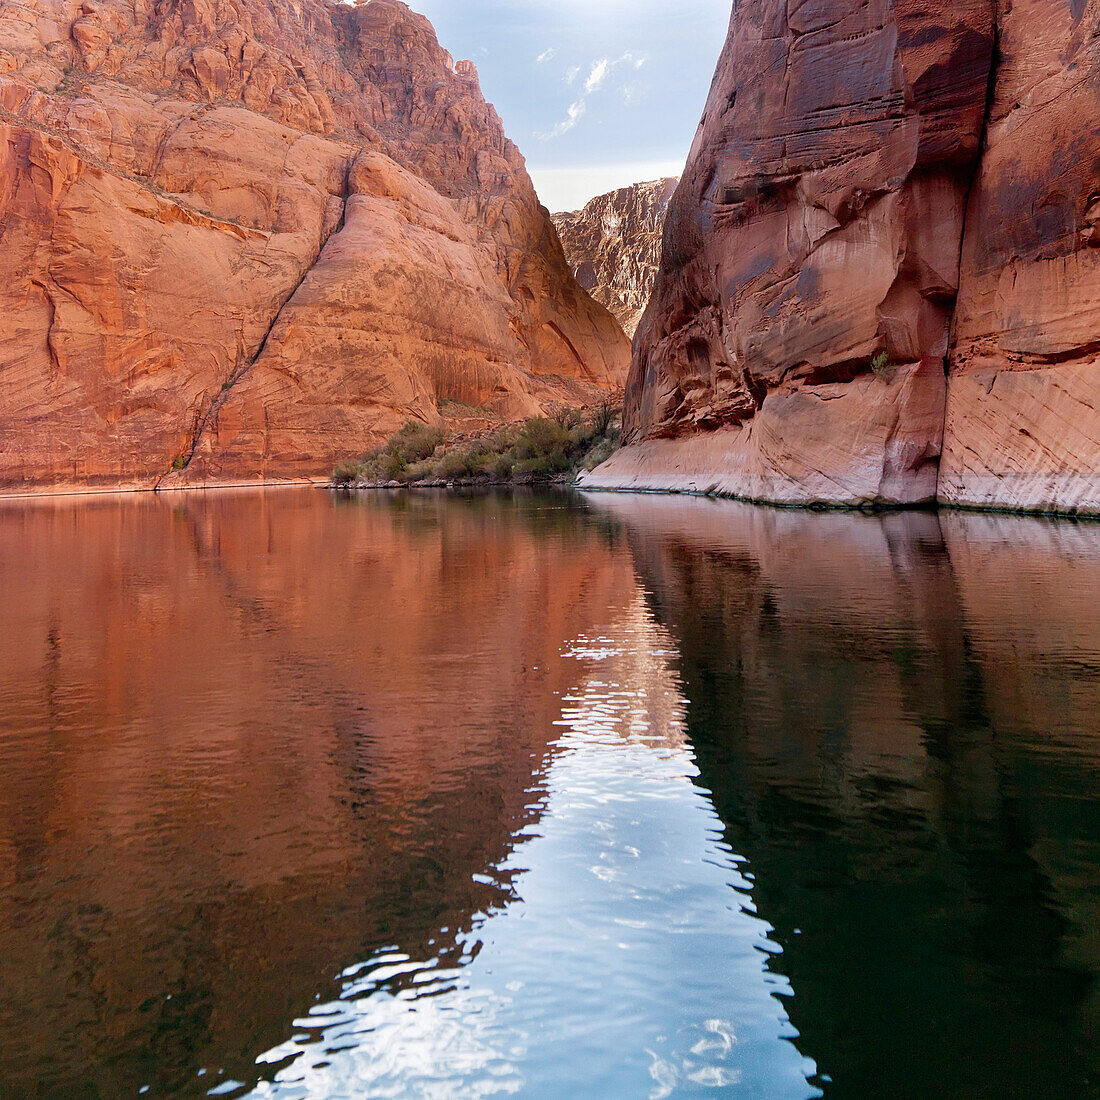 'Steep Rock Cliffs Along The Shoreline Reflected In The Colorado River; Arizona, United States of America'